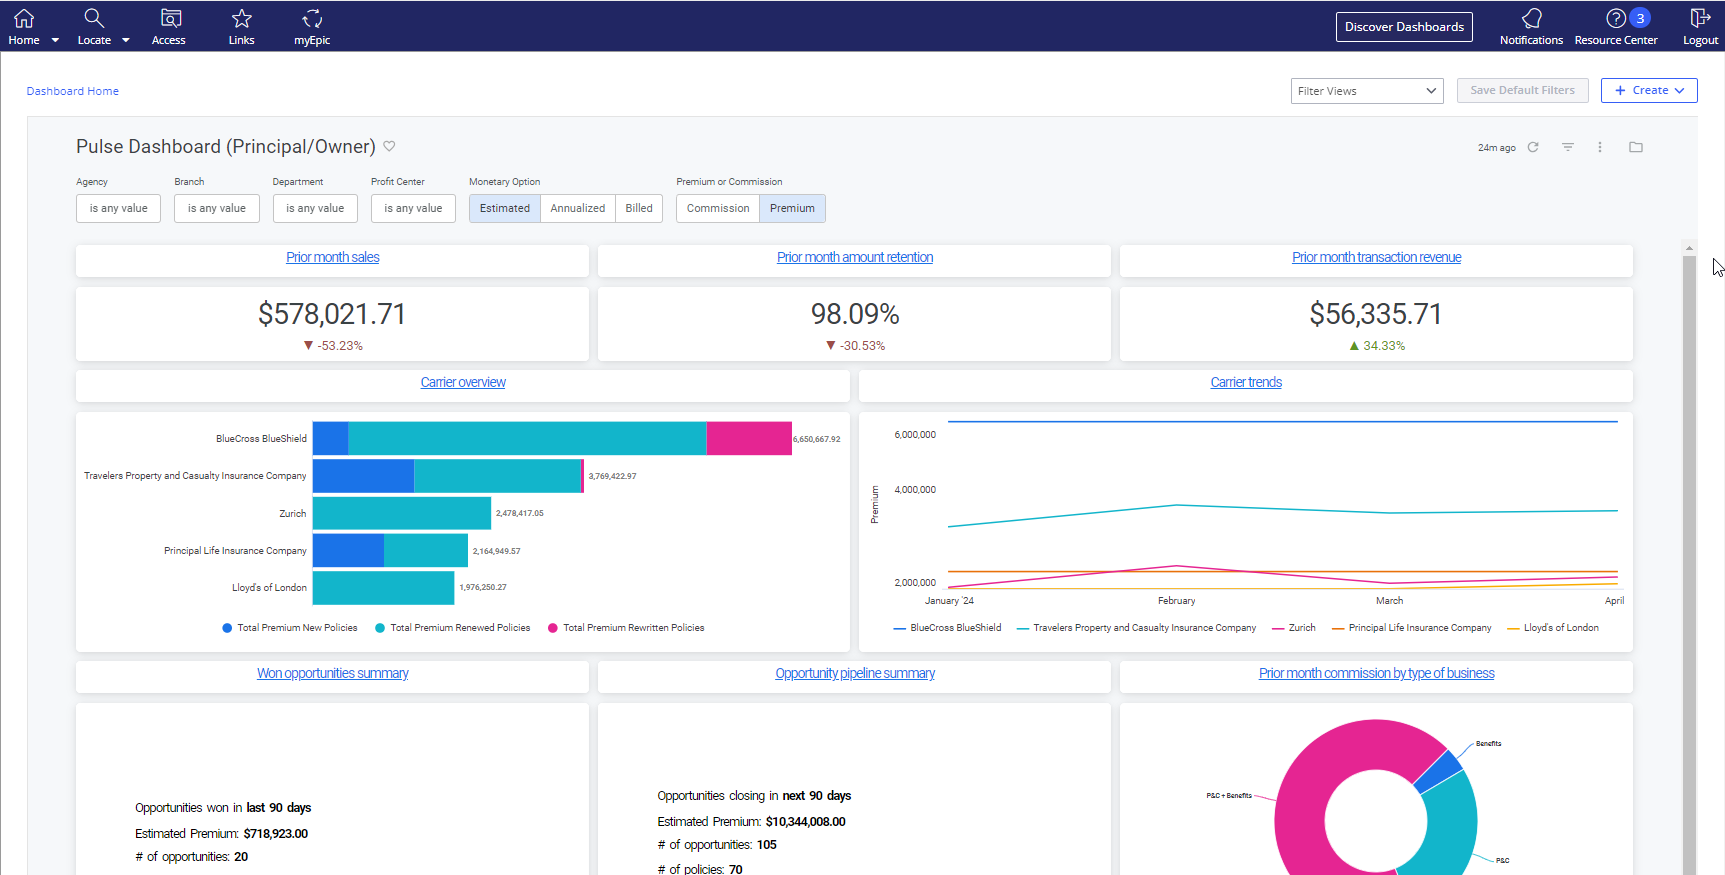 Applied Epic Dashboards